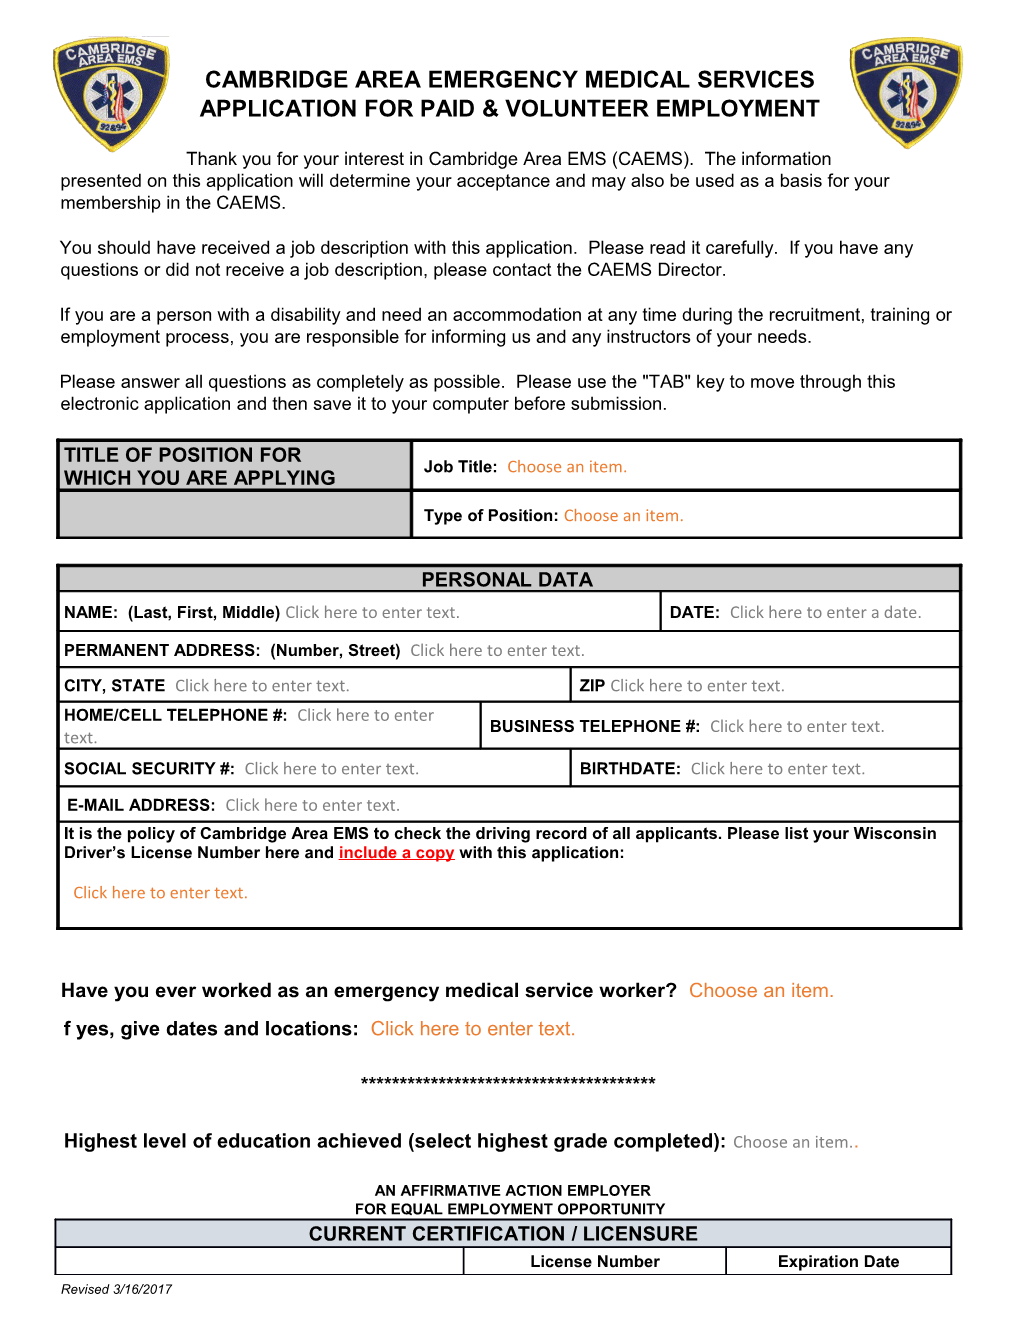 Application for Paid & Volunteer Employment